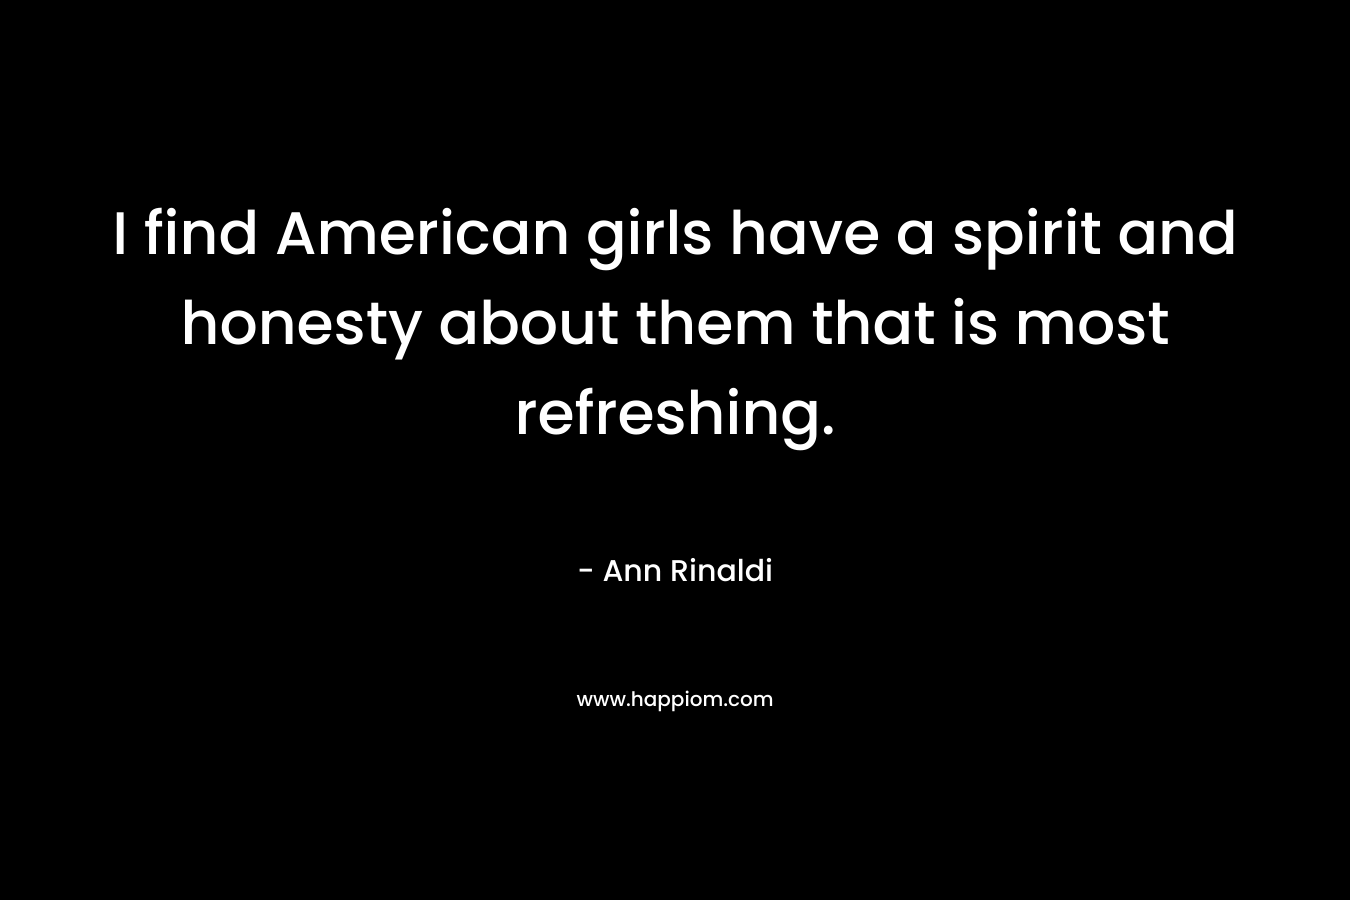 I find American girls have a spirit and honesty about them that is most refreshing.